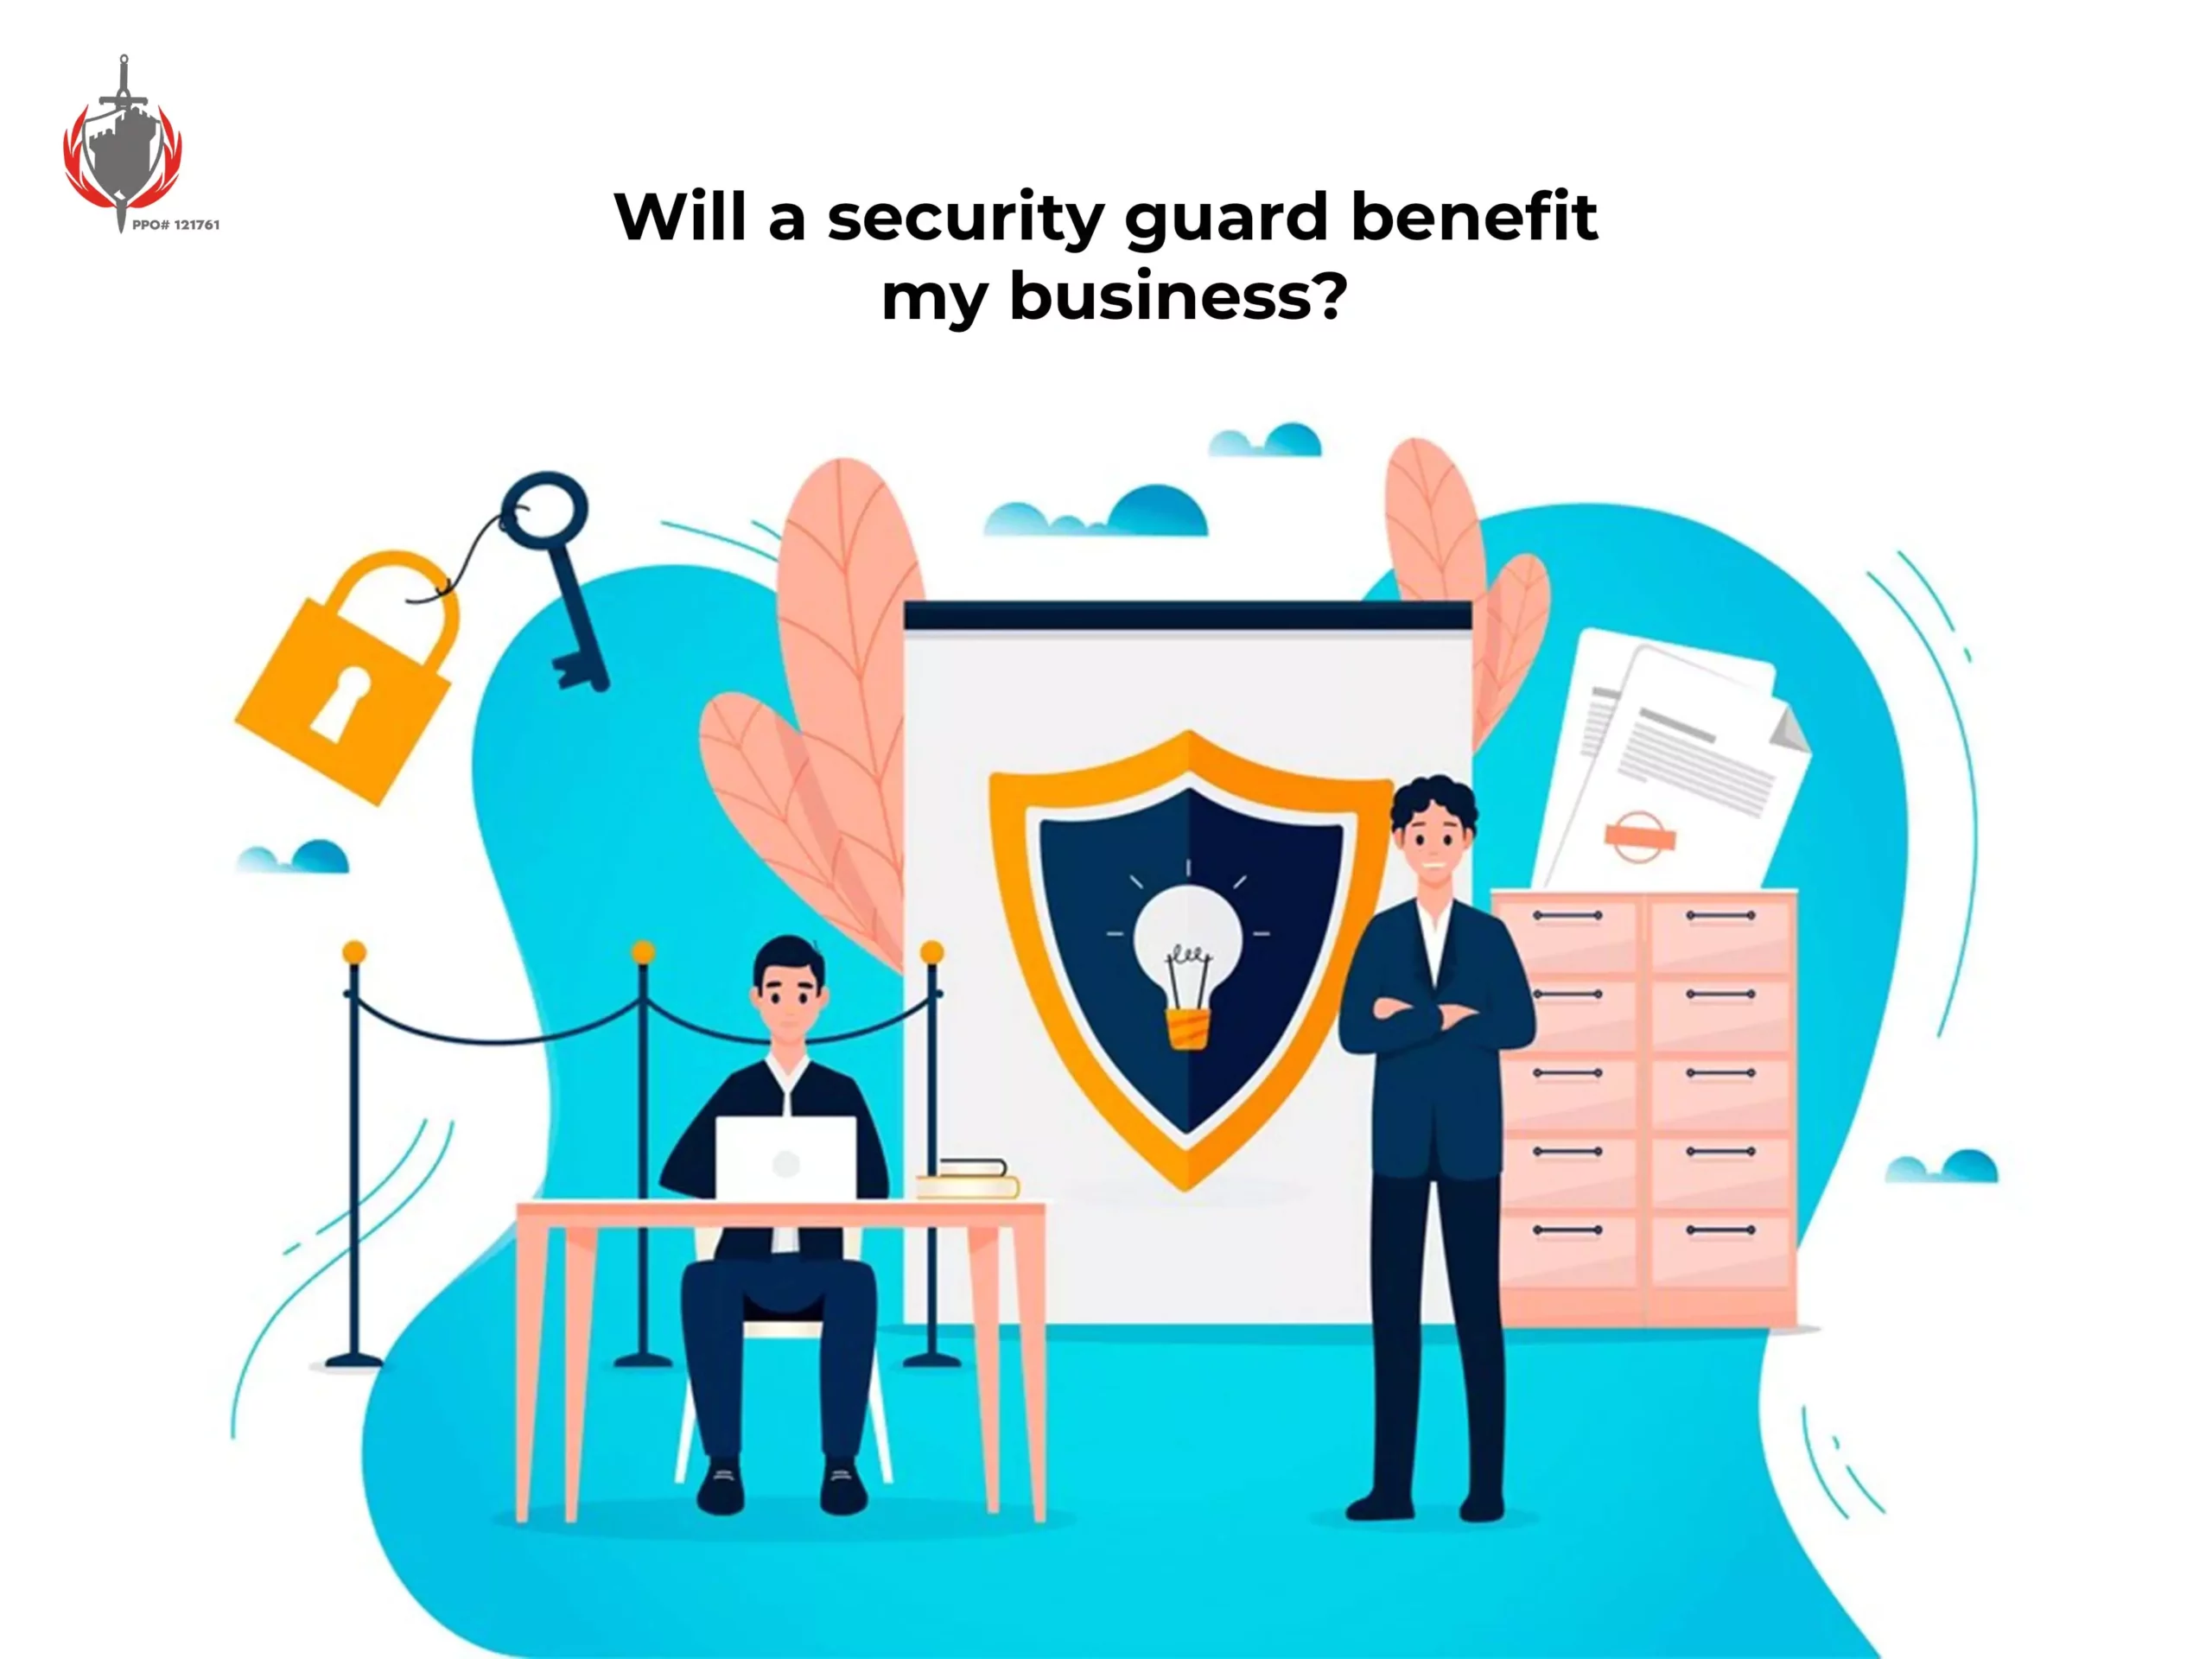 Will a security guard benefit my business